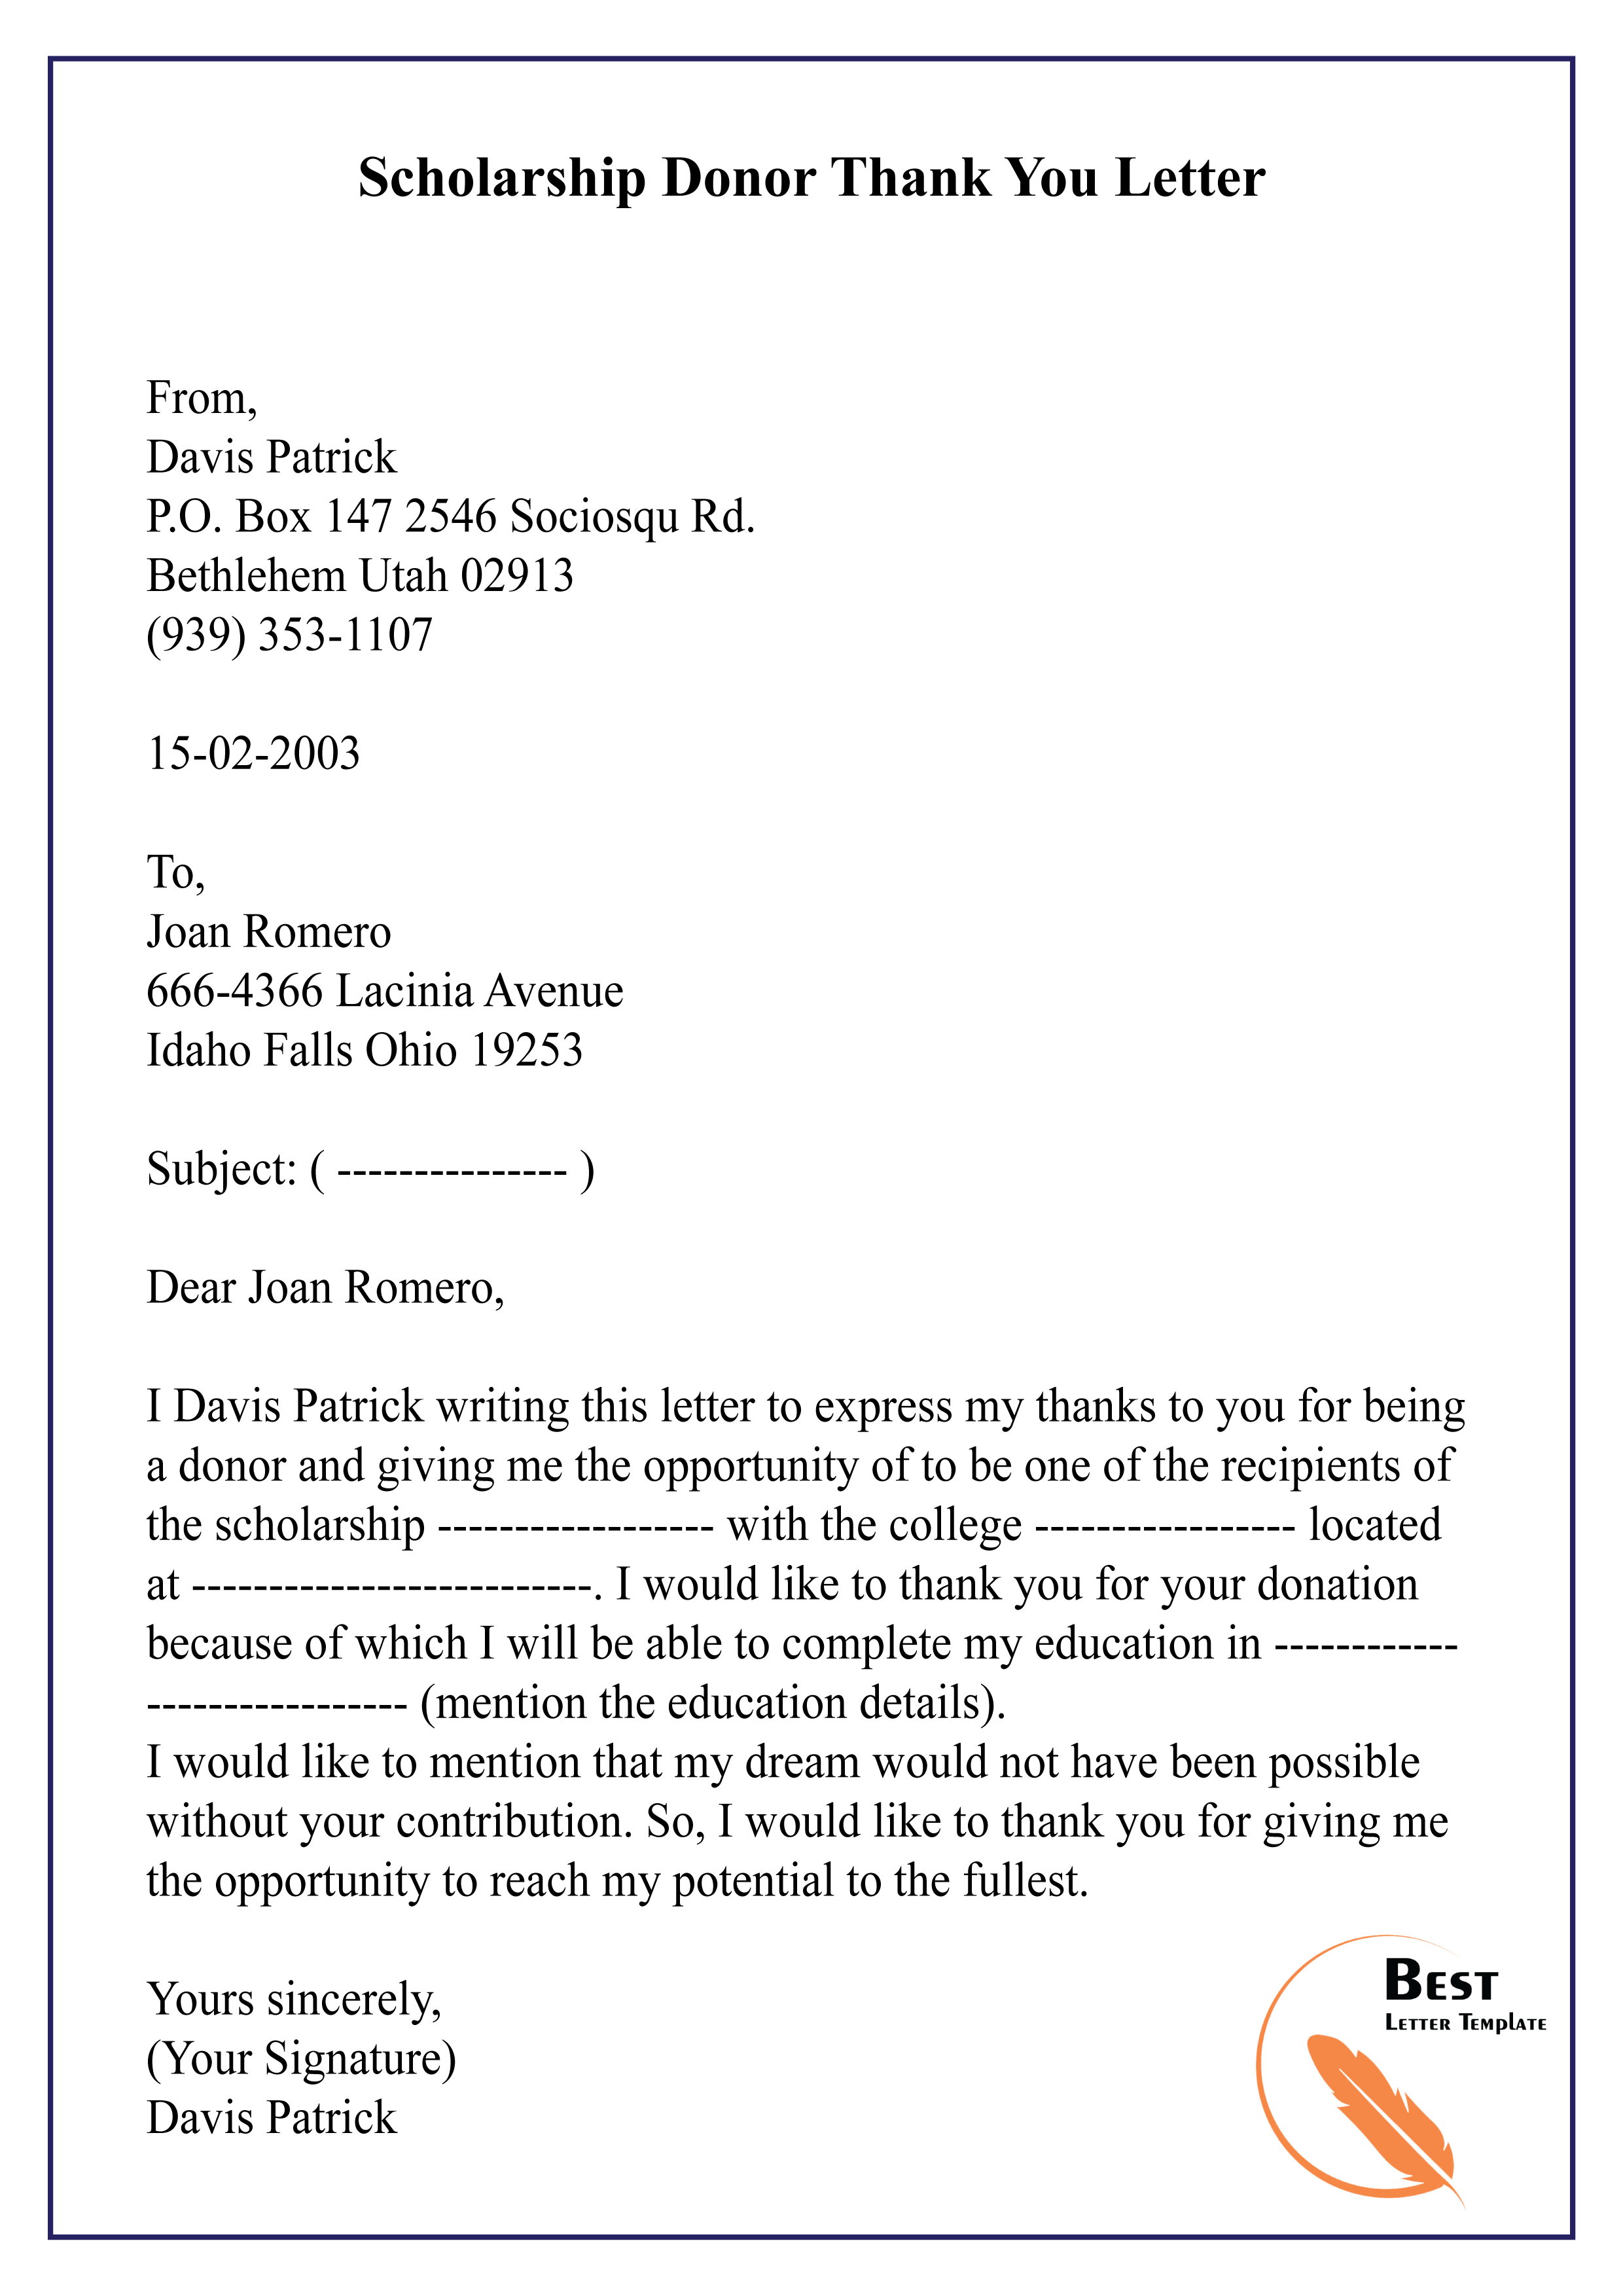 Thank You Letter To A Donor Sample